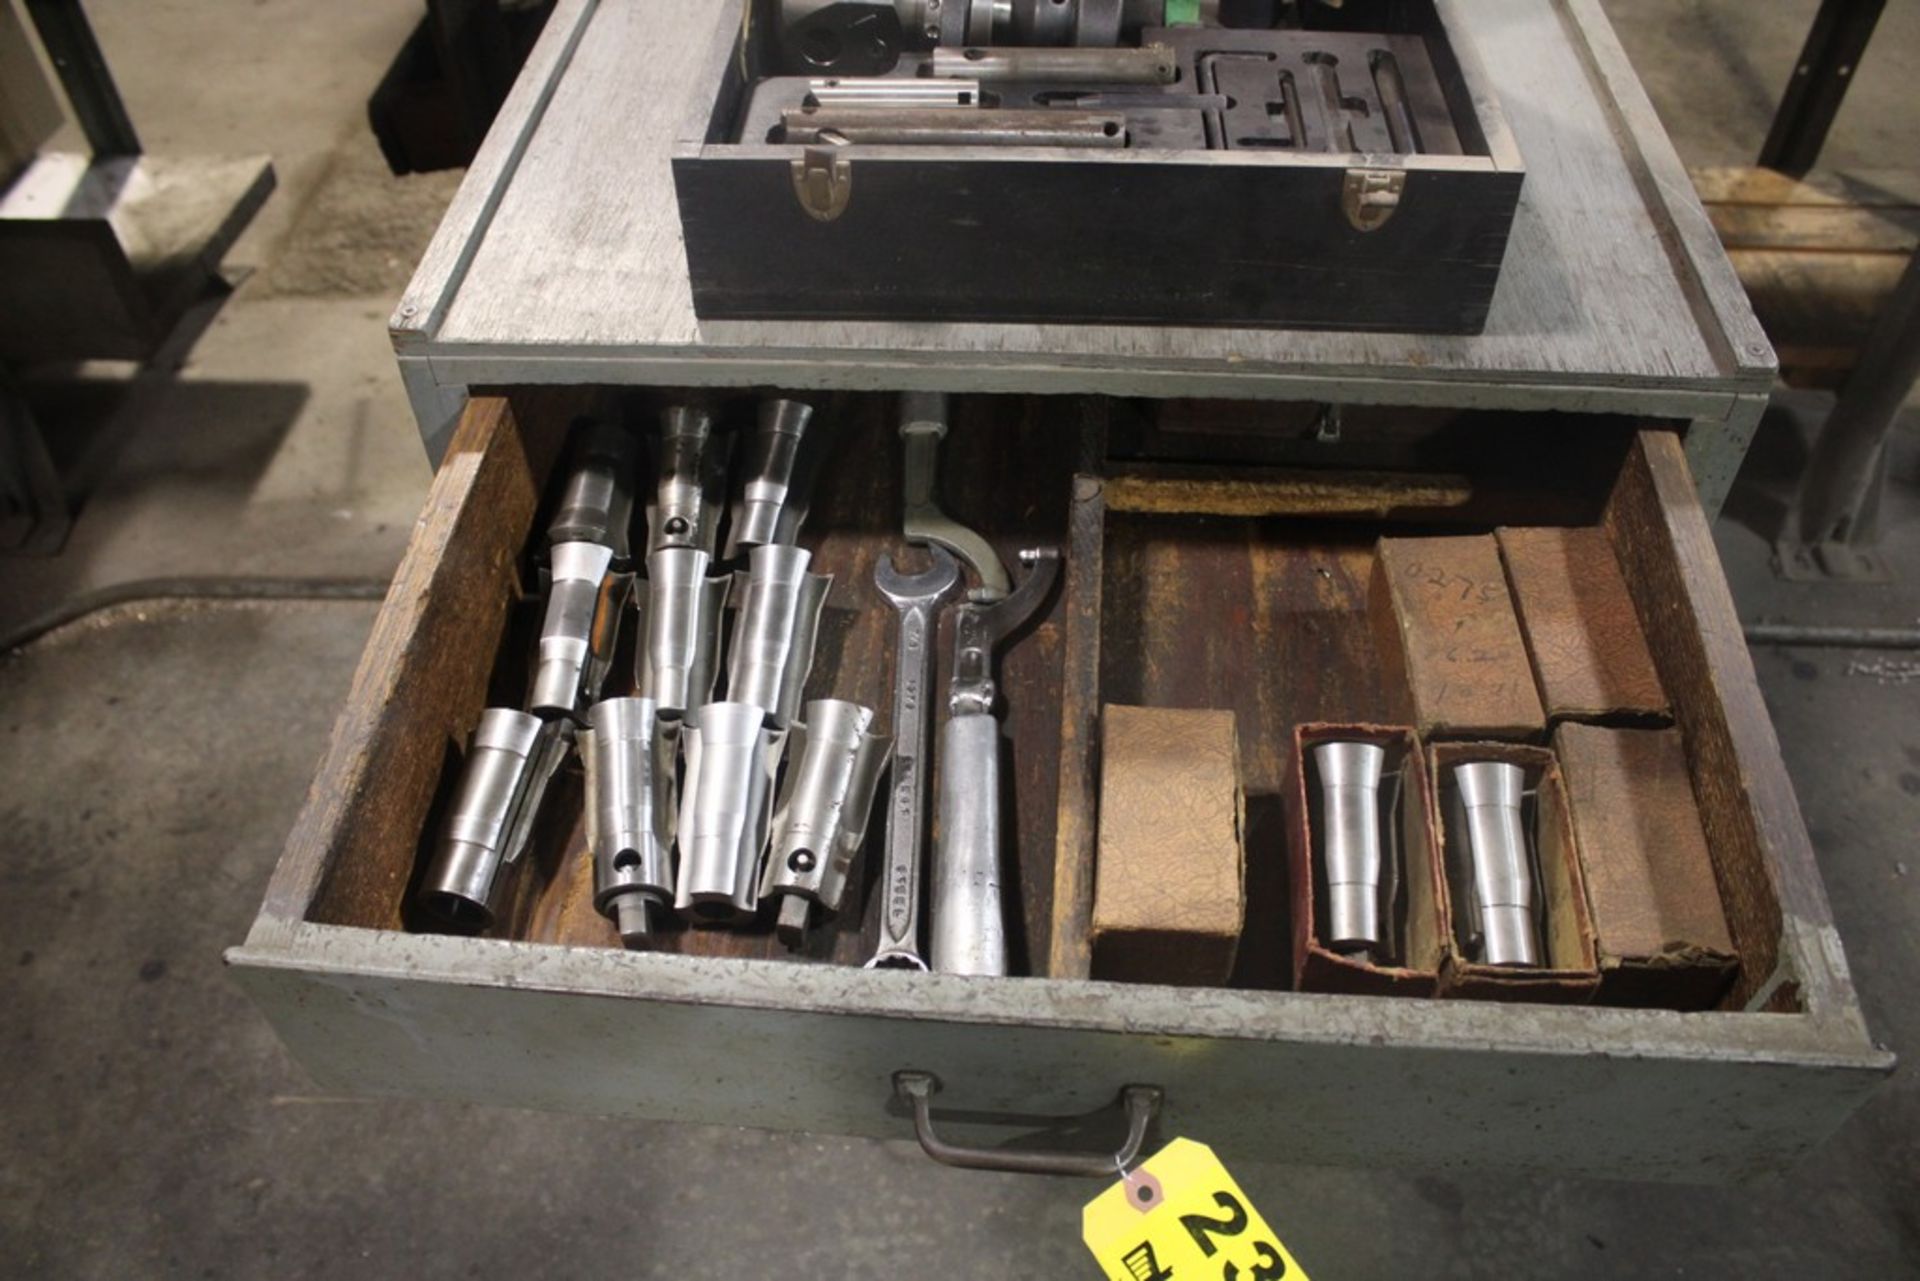 PRATT & WHITNEY TOOL CABINET WITH COLLETS, WRENCHES, HOLD DOWNS - Image 2 of 3